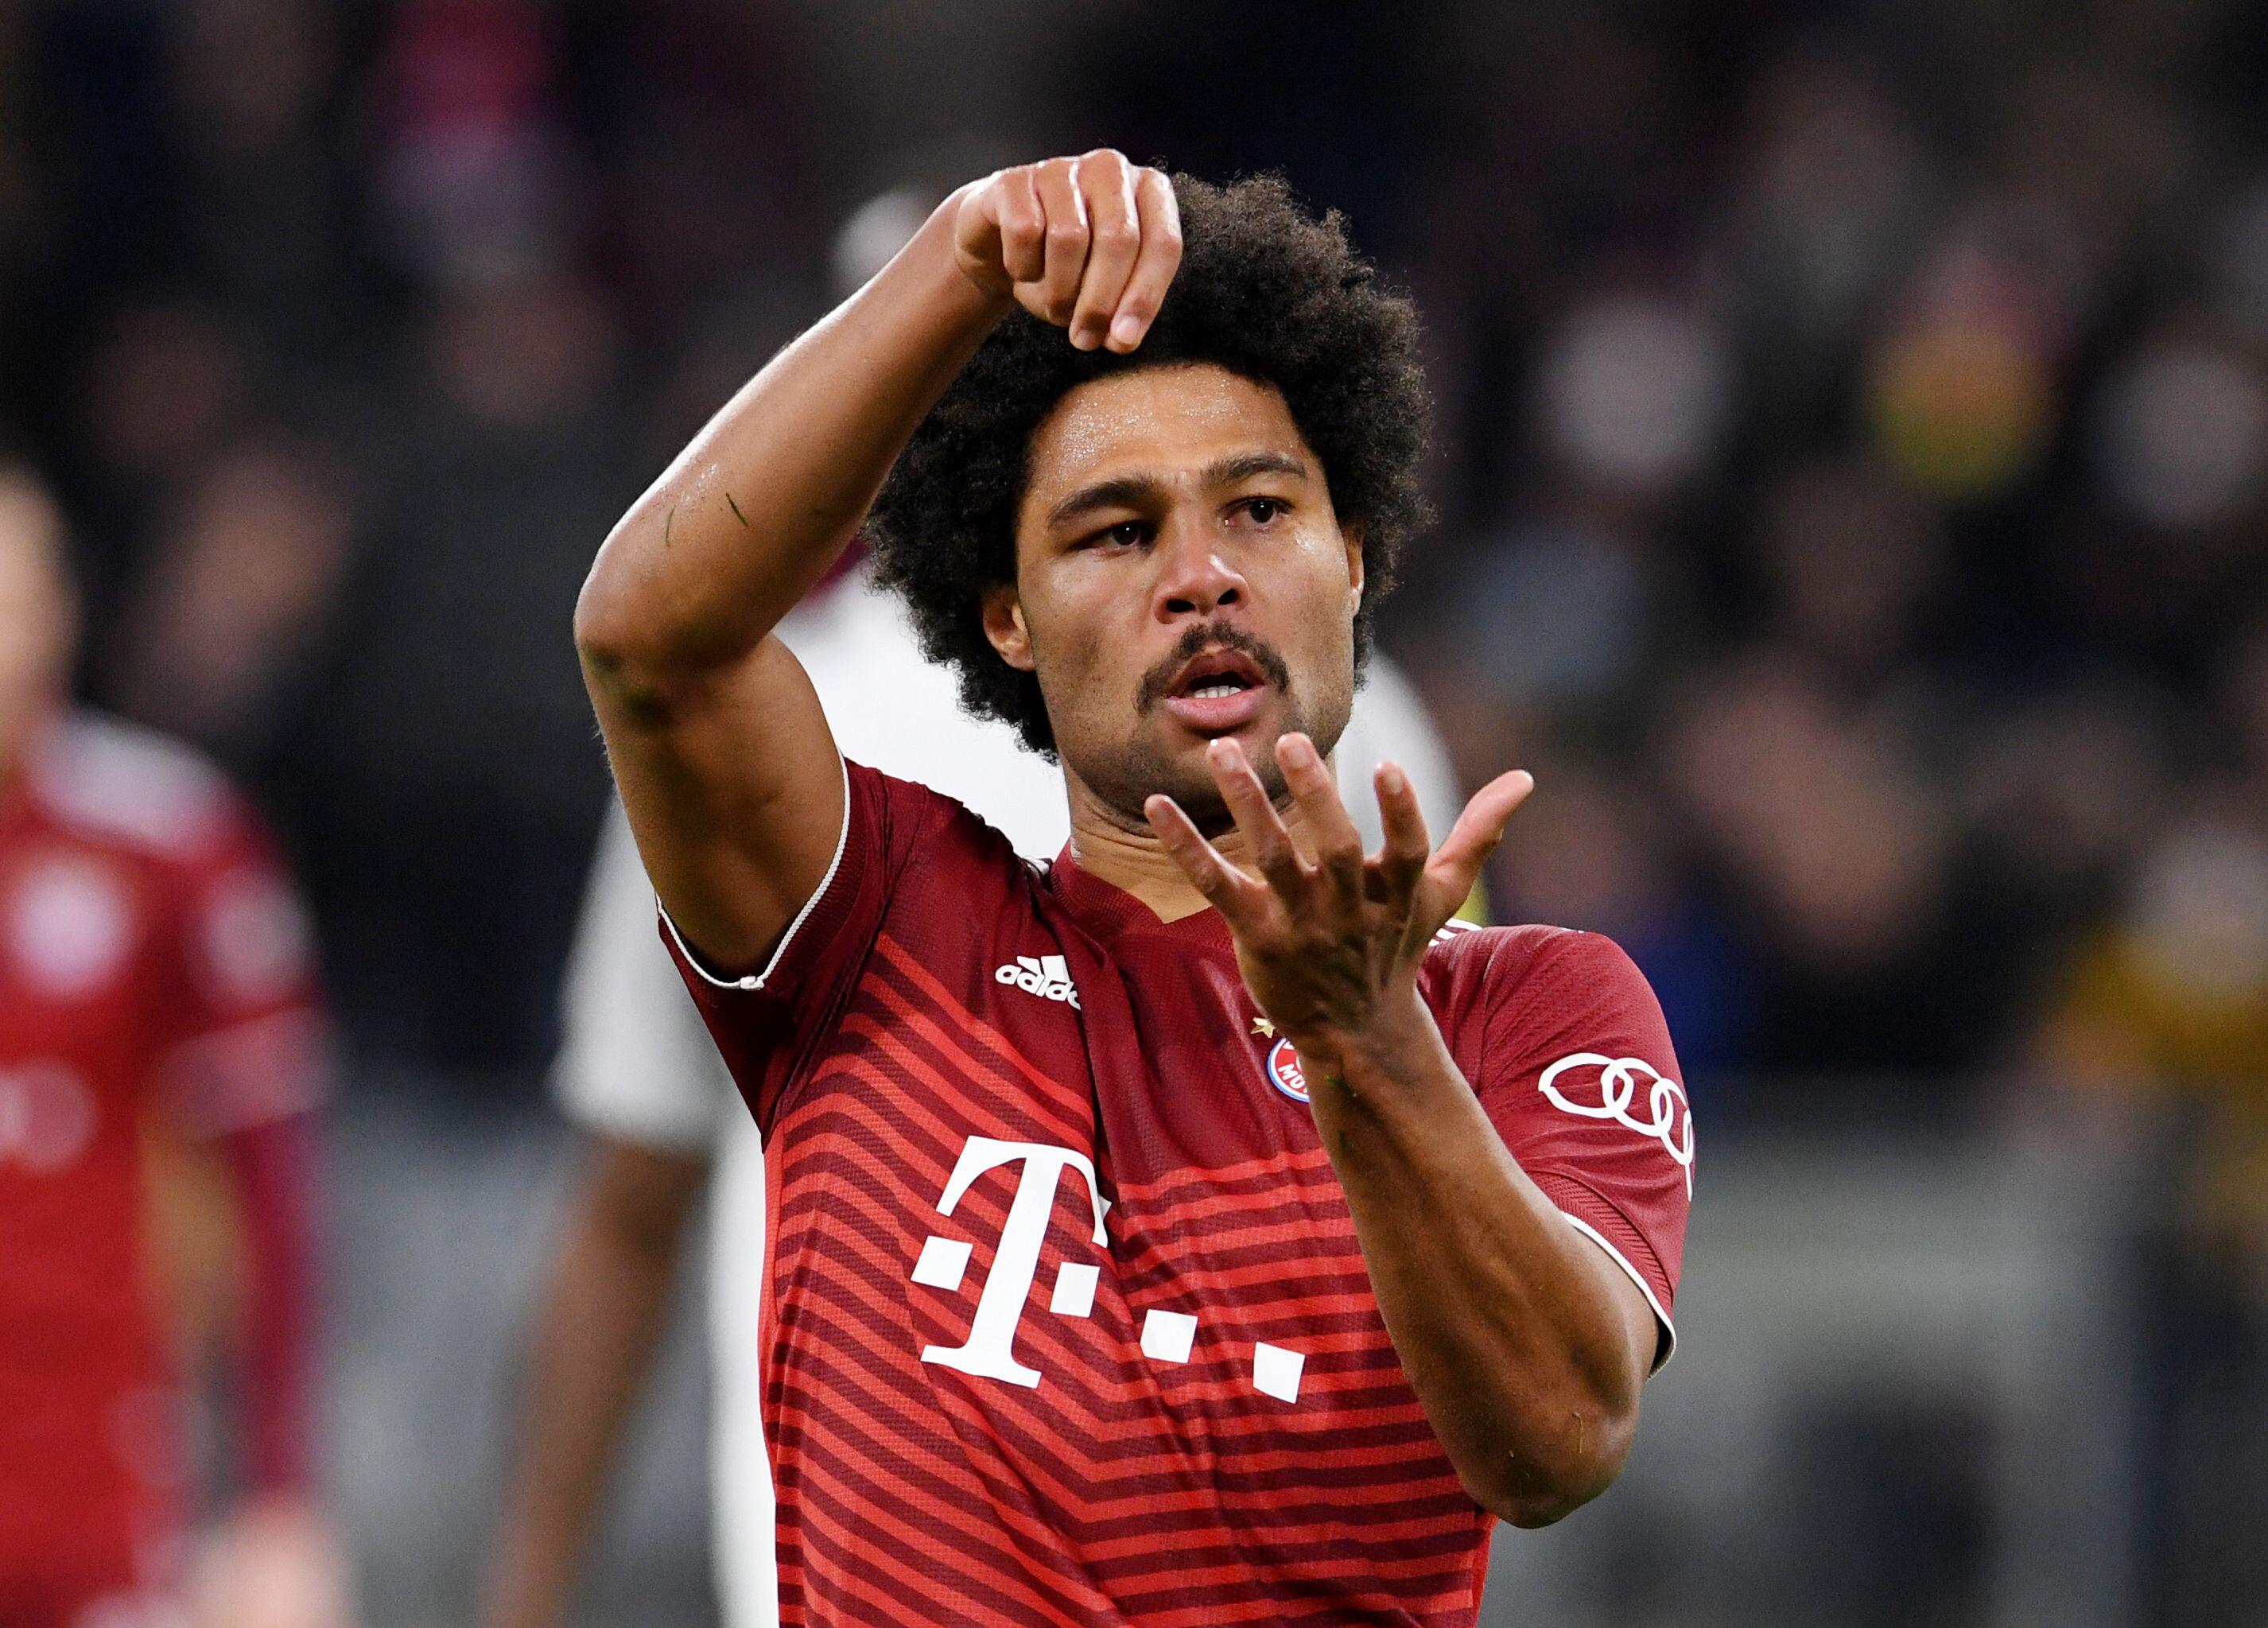 Bayern Munich confirm that Serge Gnabry has signed contract extension until 2026